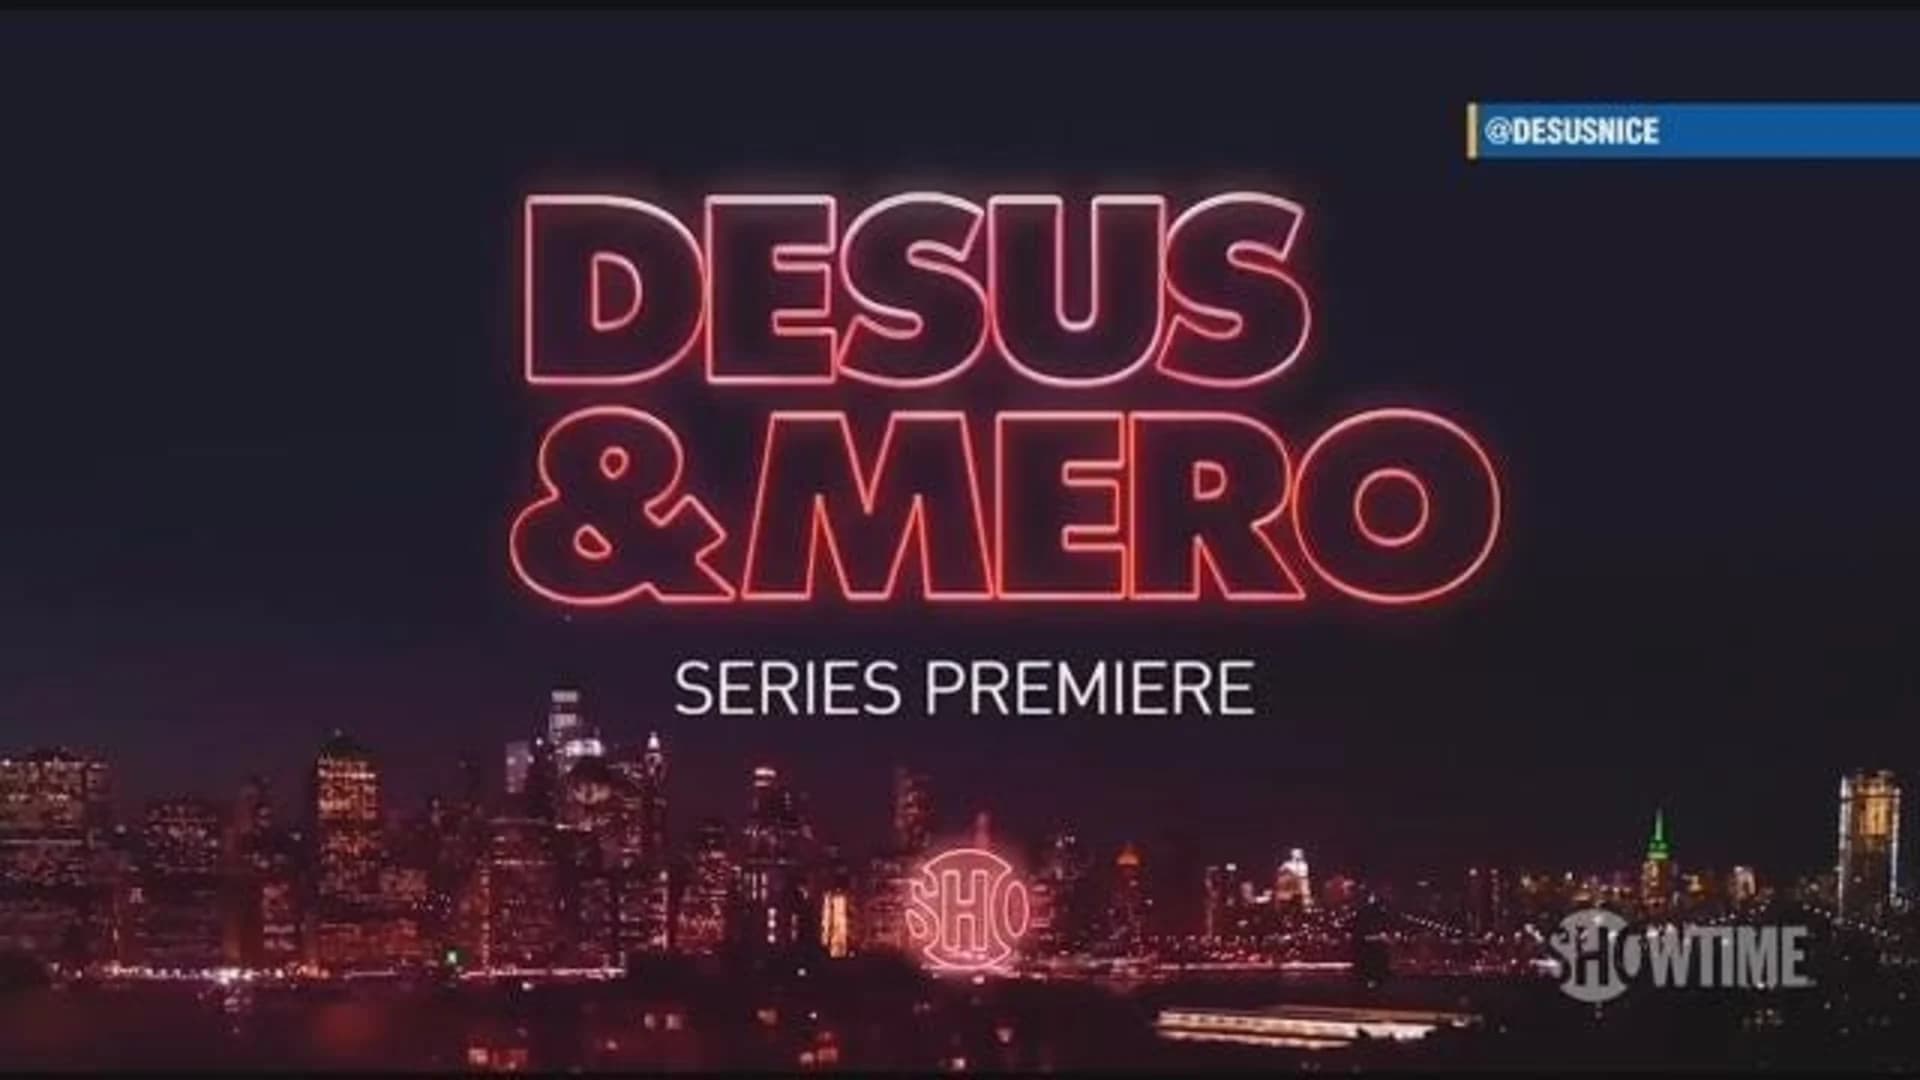 Desus and Mero premiere new series at The Clocktower